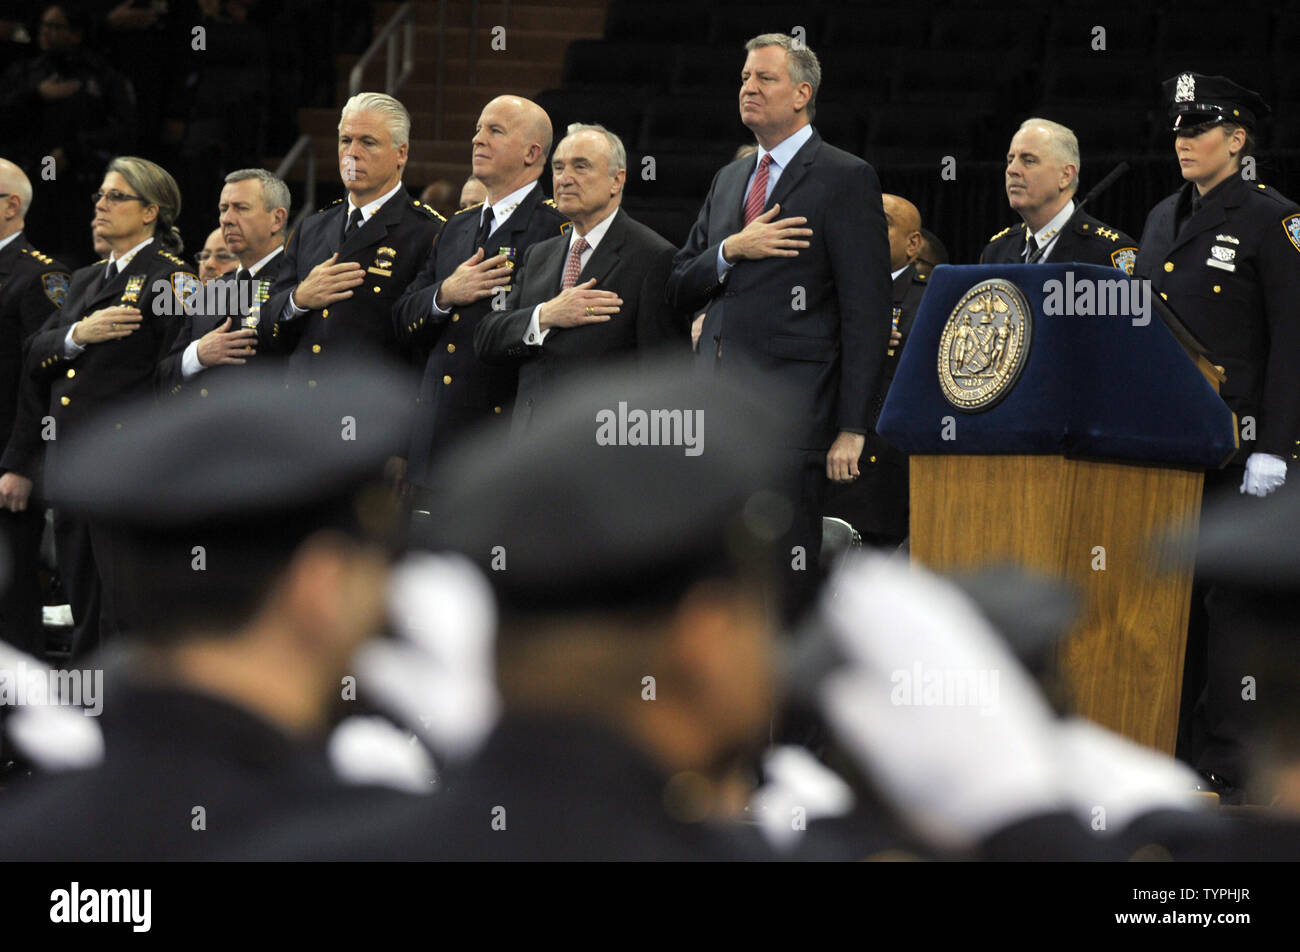 New York City Mayor Bill de Blasio and New York Police Commissioner William Bratton stand on stage during the New York City Police Academy's graduation ceremony at Madison Square Garden in New York City on December 27, 2014. The relationship between de Blasio and the NYPD has been poor in the past weeks due to the alleged lack of support for the police from de Blasio.      UPI/Dennis Van Tine Stock Photo